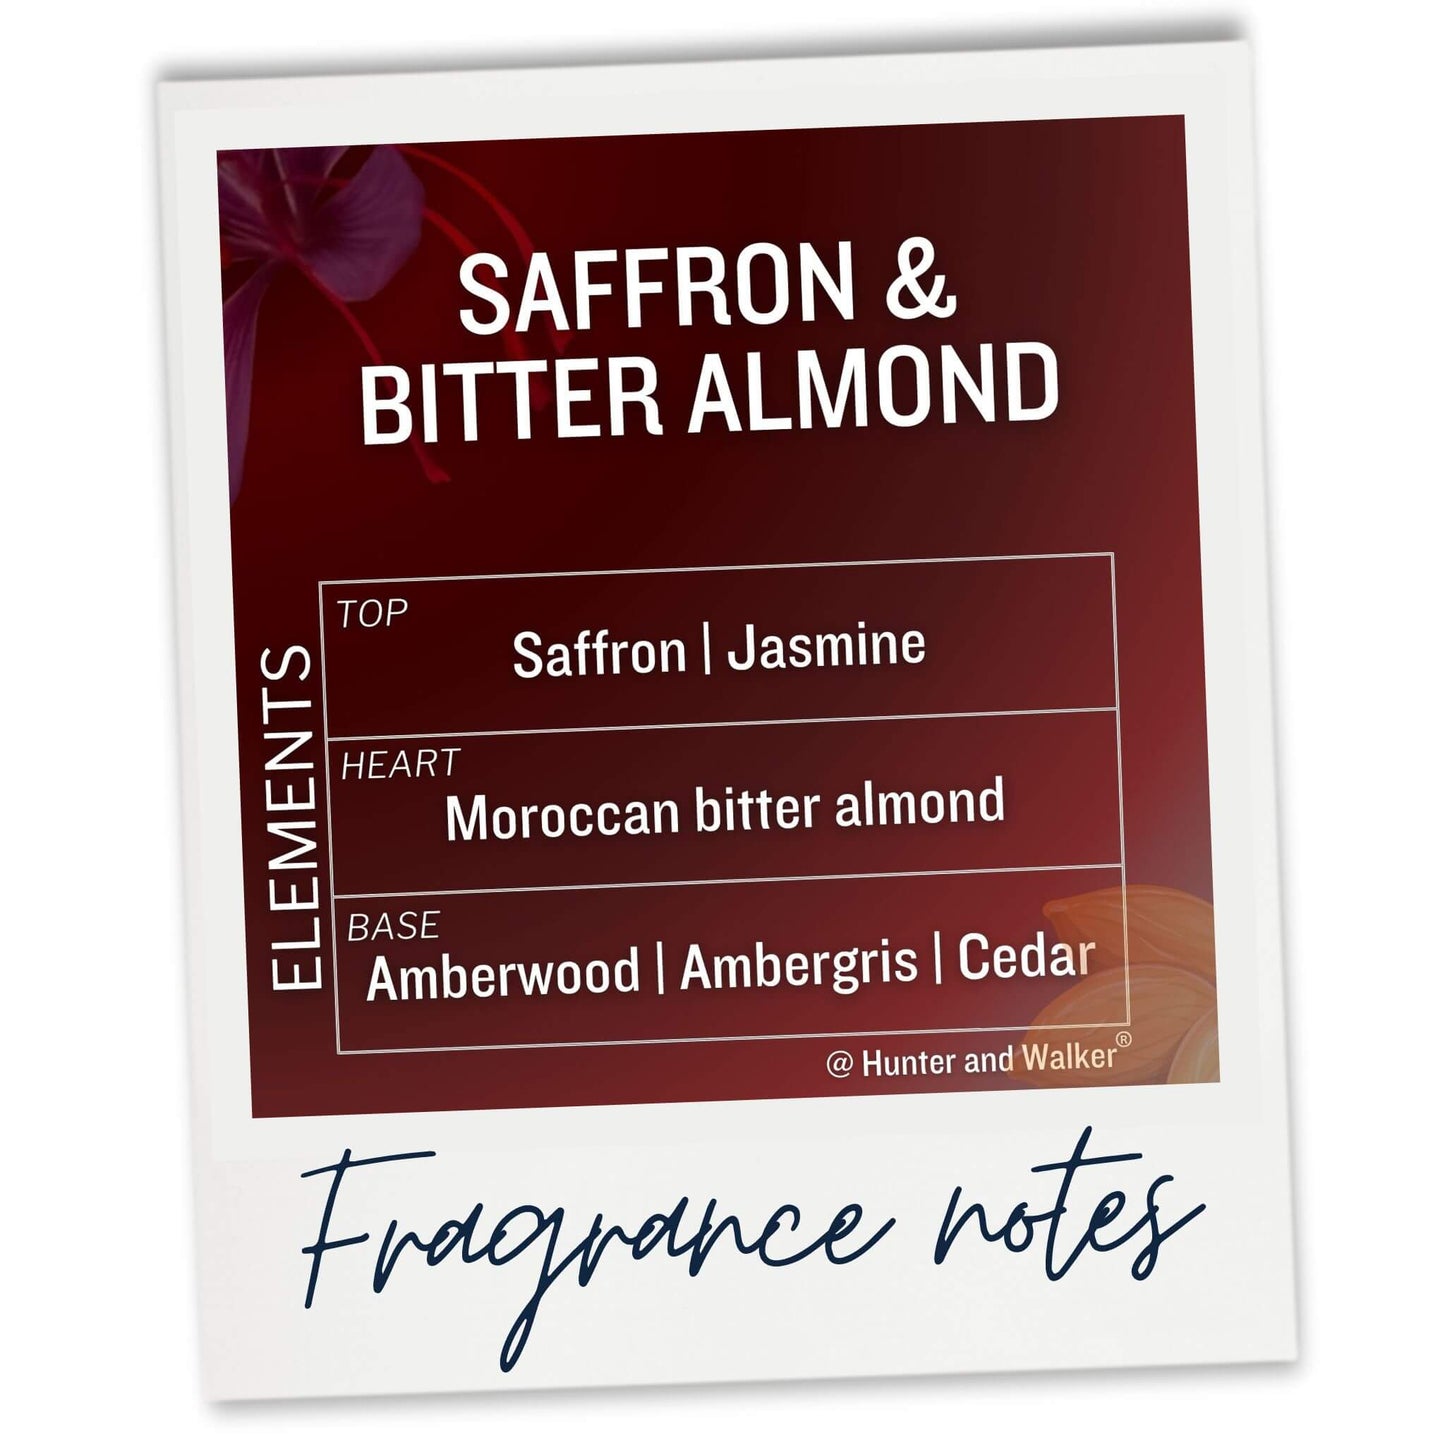 Saffron and Bitter Almond fragrance notes